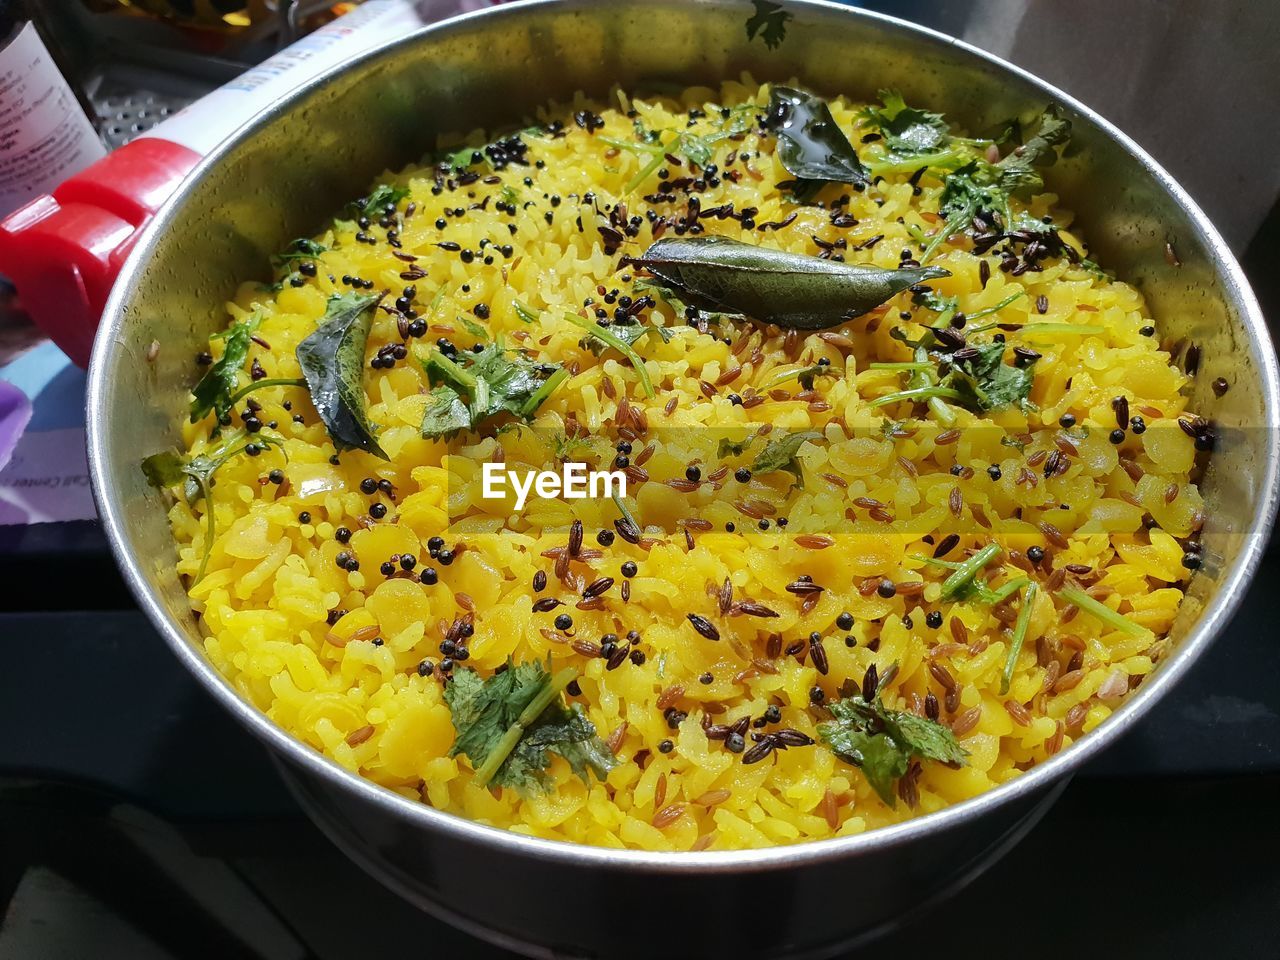 Dal rice cooked well glamour